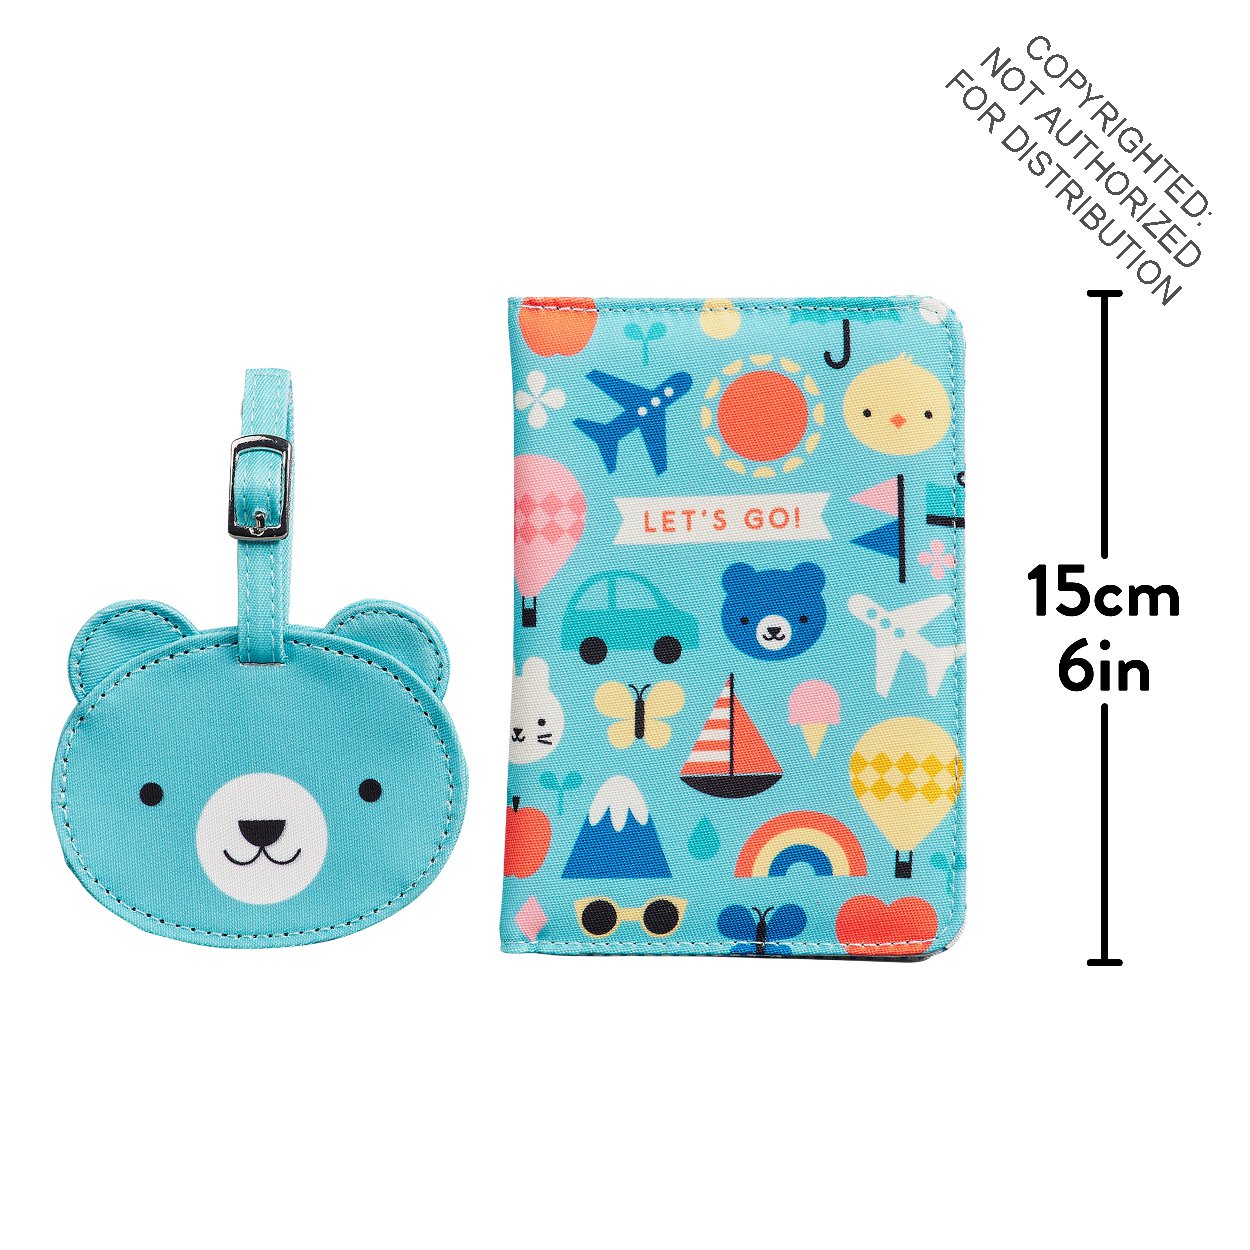 Baby Travel Set - Passport Cover and Luggage Tag